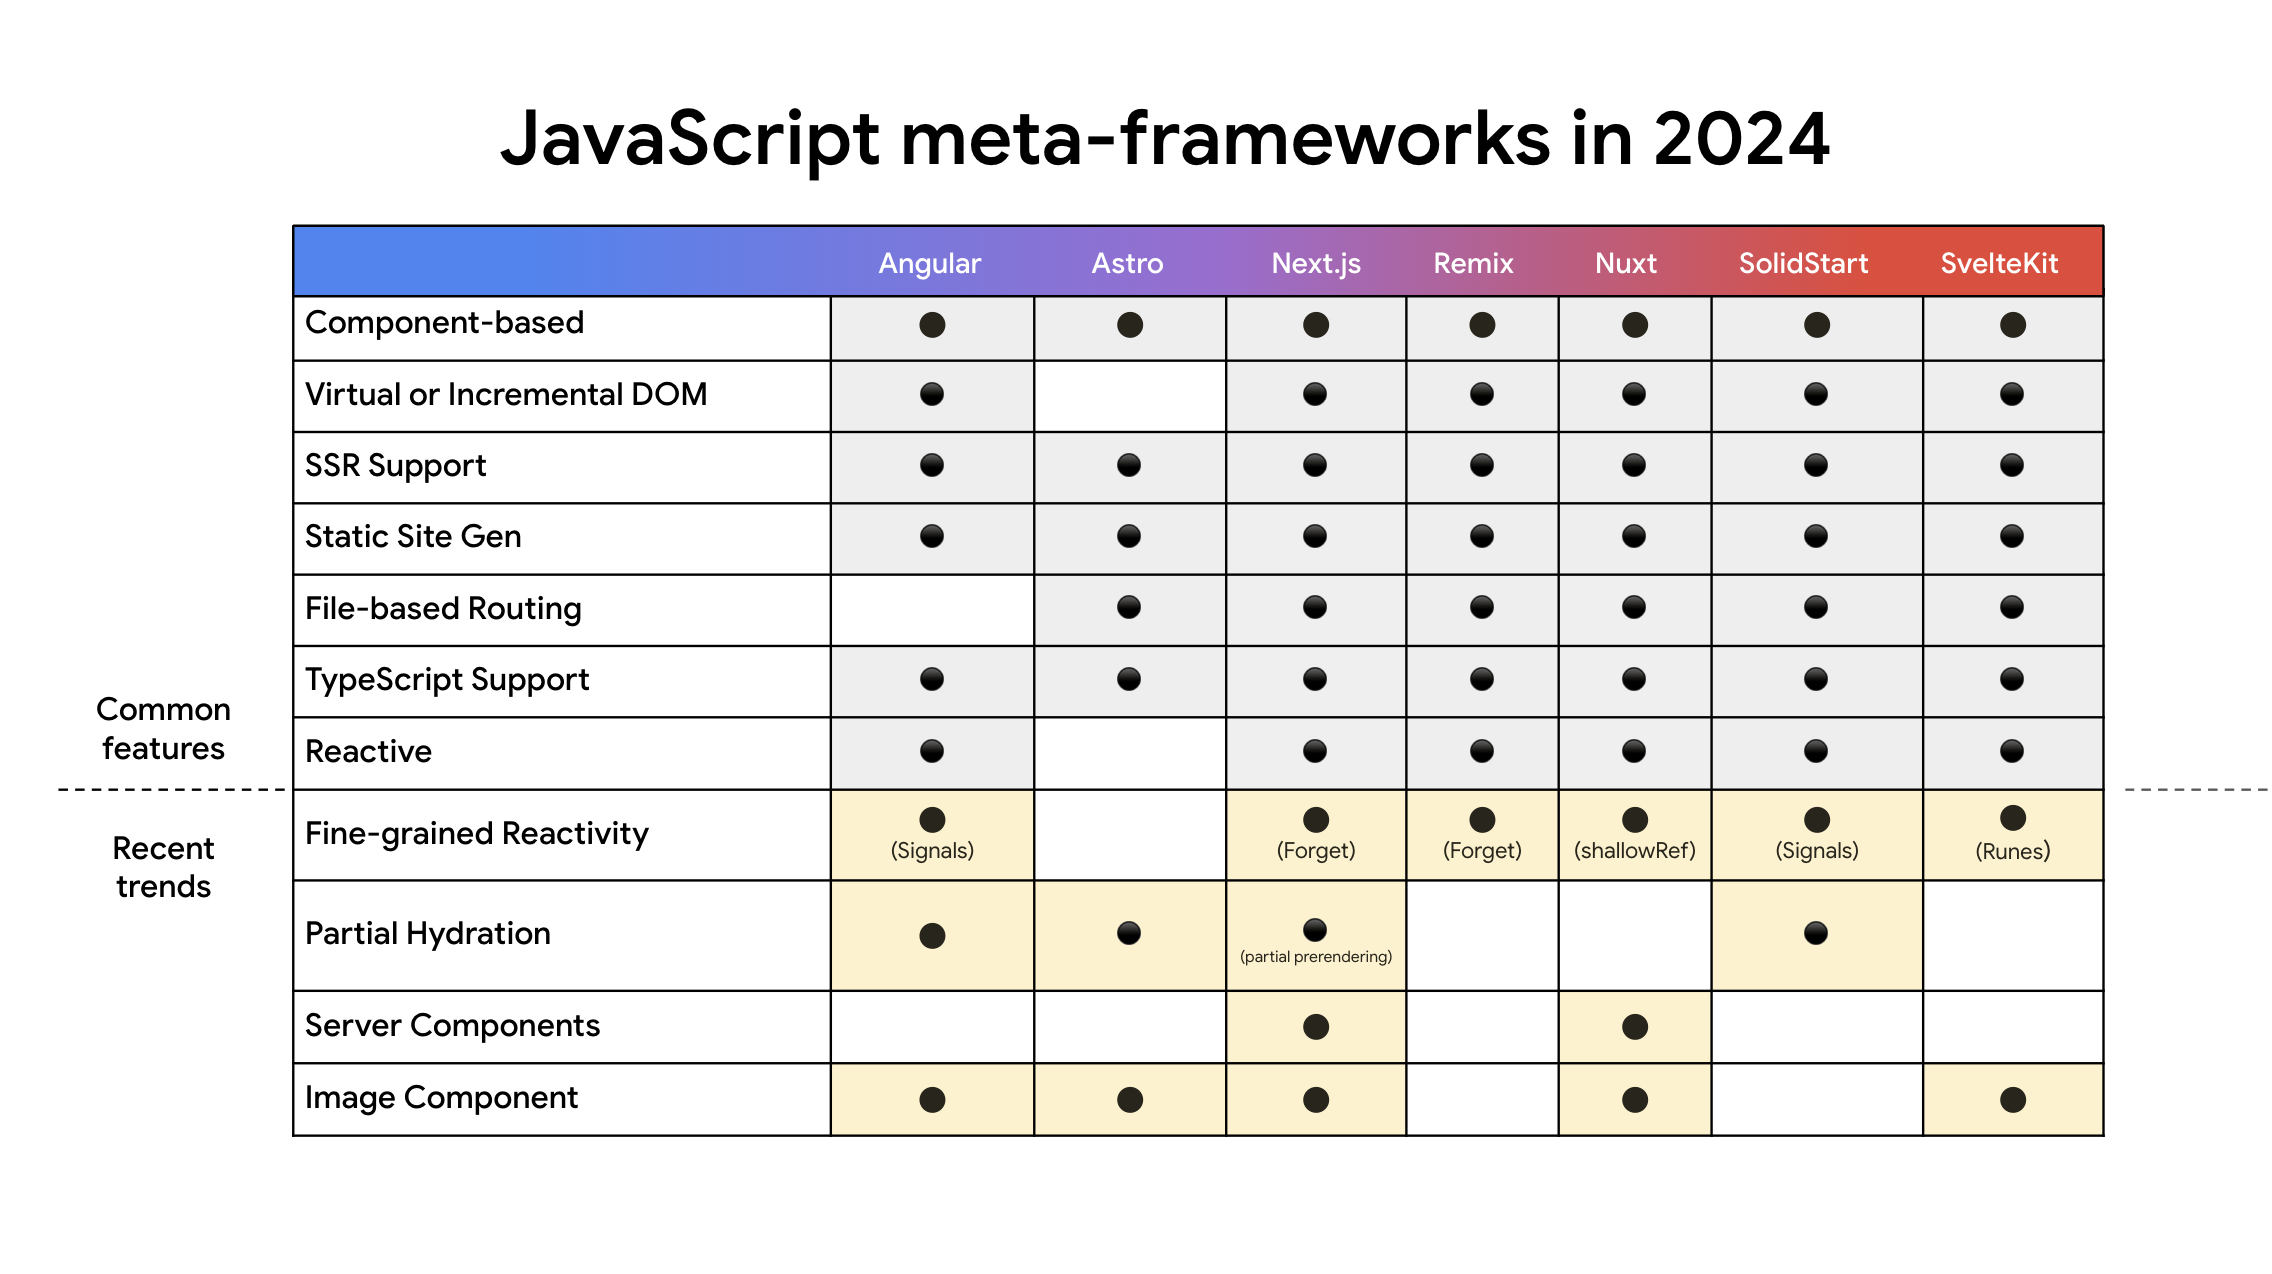 Chart comparing framework features